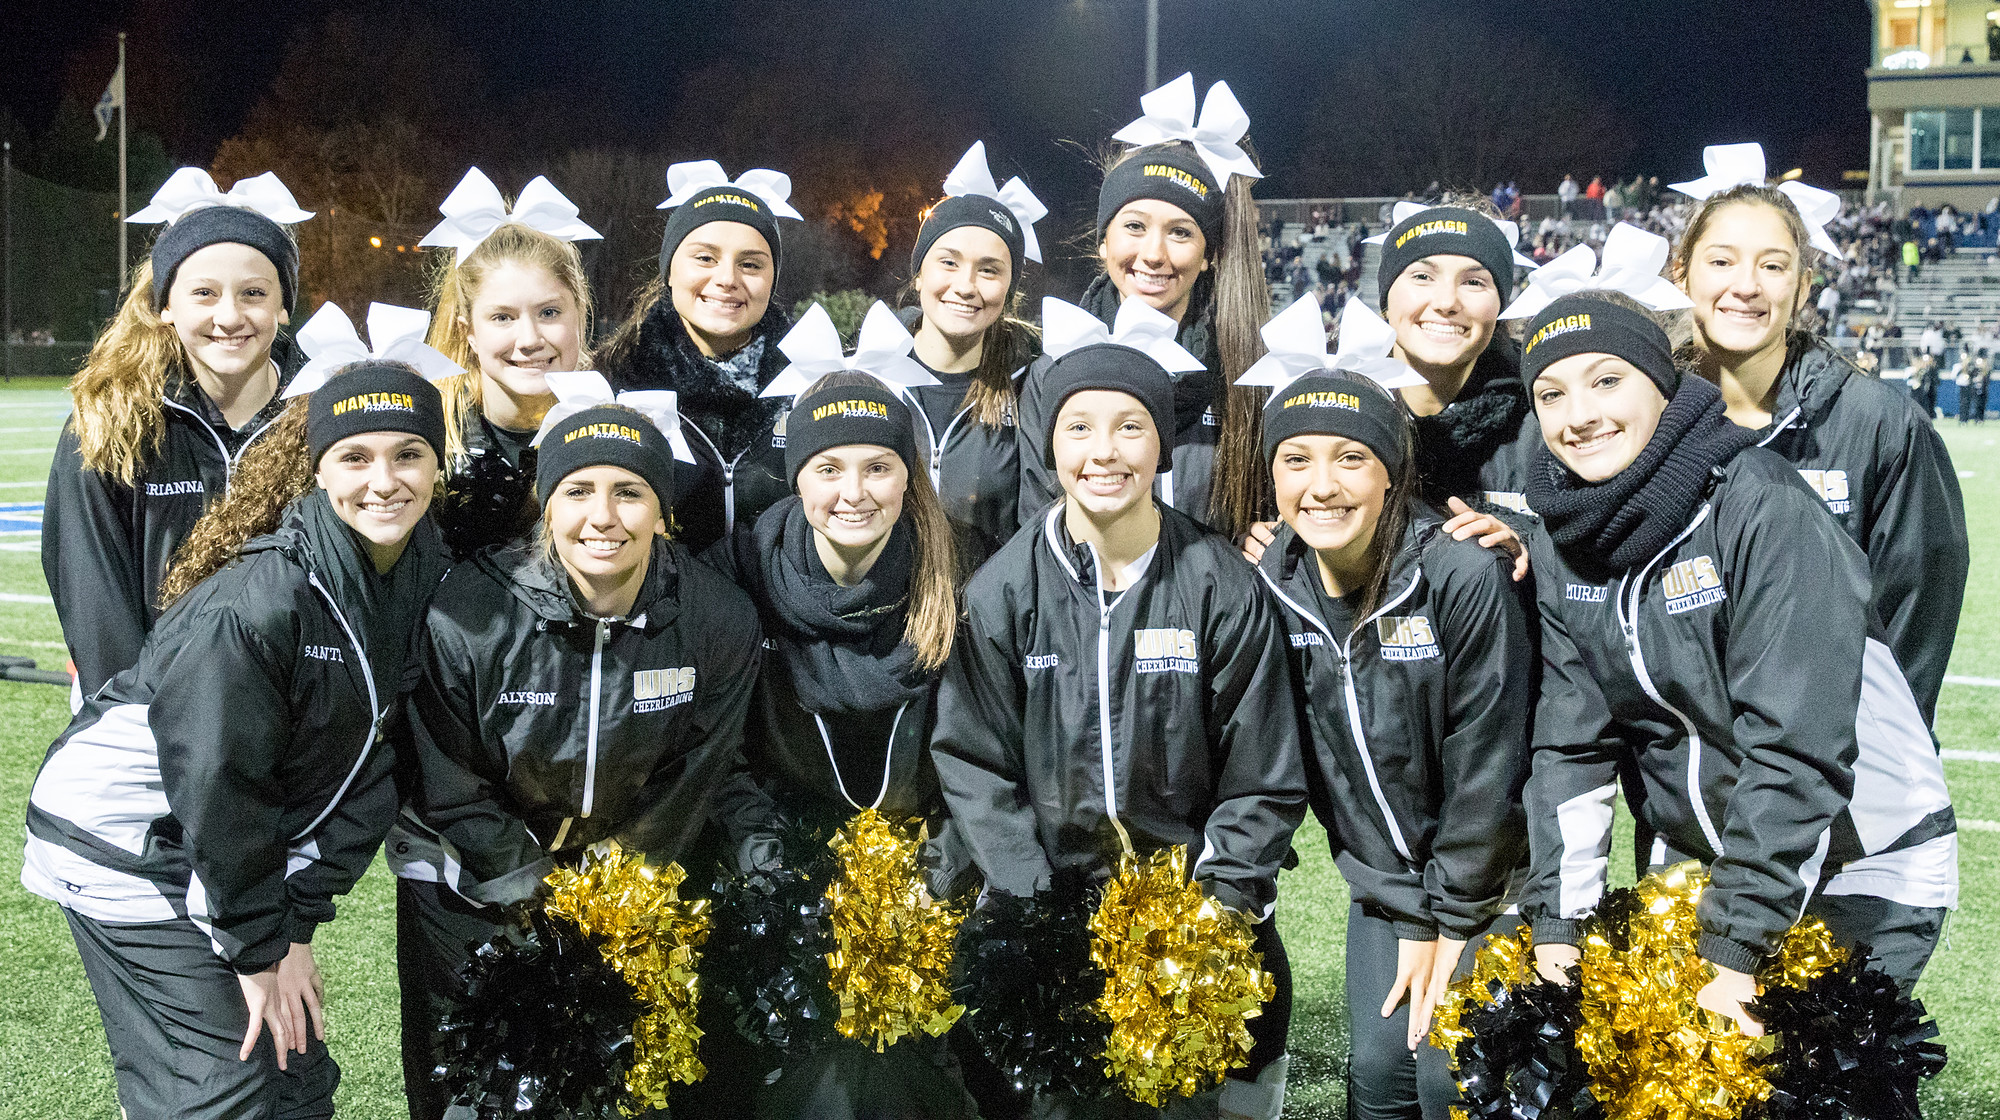 Wantagh’s cheerleaders kept the crowd energized.